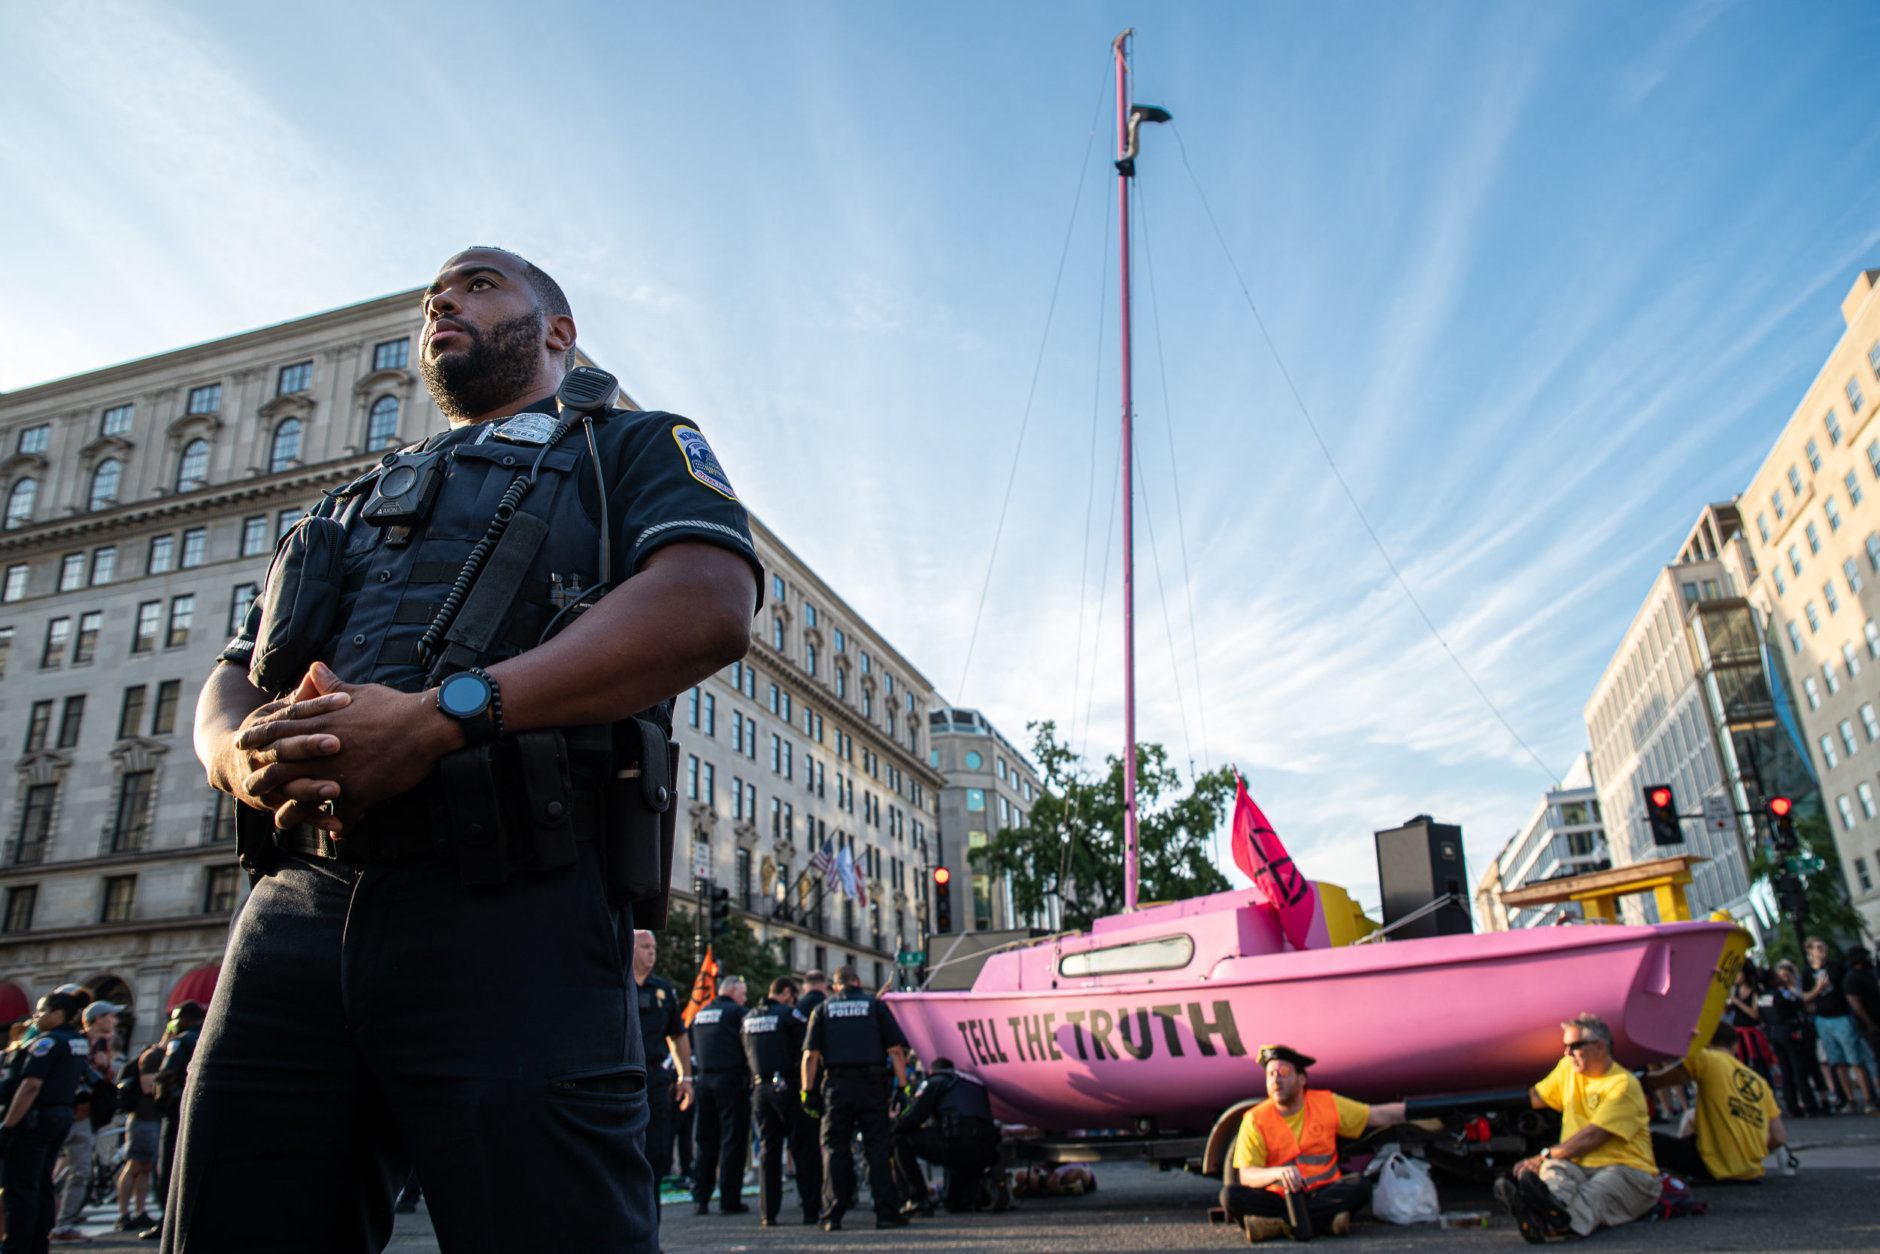 While D.C. police pushed onlookers back from the sailboat as they worked to extract bound protesters, about 100 people remained to cheer on their colleagues as police wheeled in a generator and electric saw. (WTOP/Alejandro Alvarez)